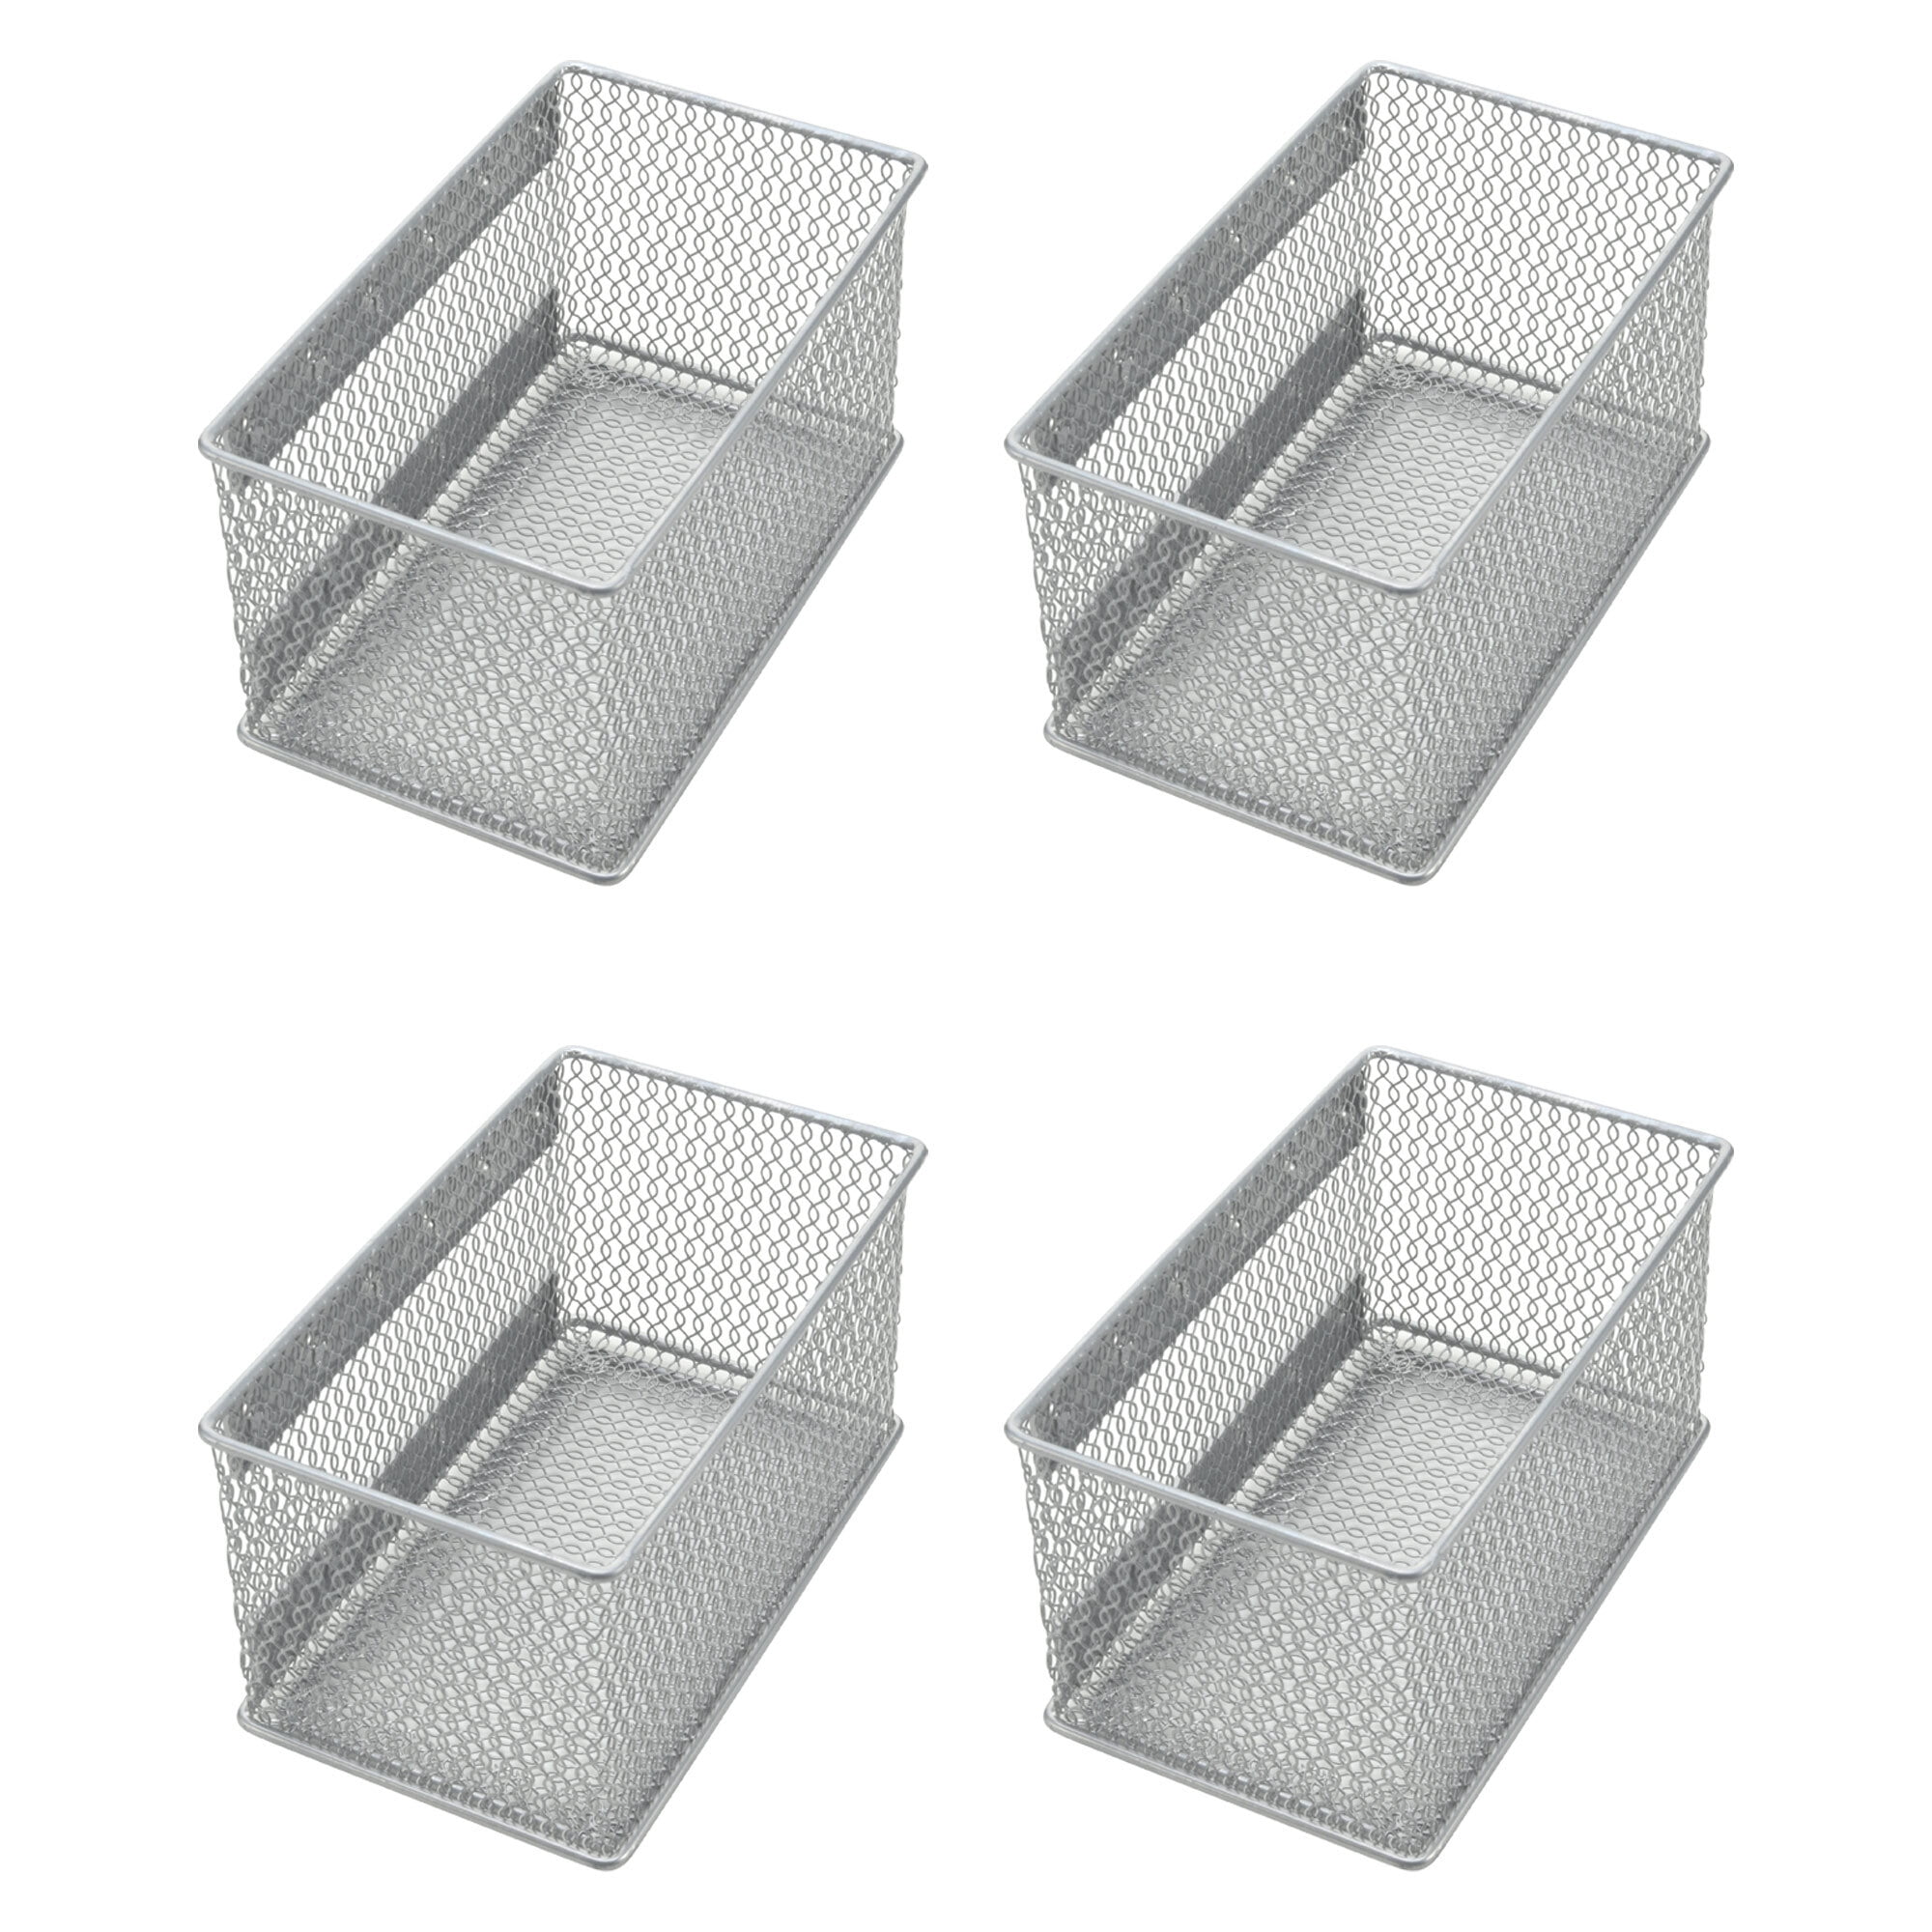 YBM Home Wire Mesh Magnetic Storage Basket Trash Caddy Office Supply Organizer Silver 7.75 in. L x 4.3 in. W x 4.3 in. H 2 Pack